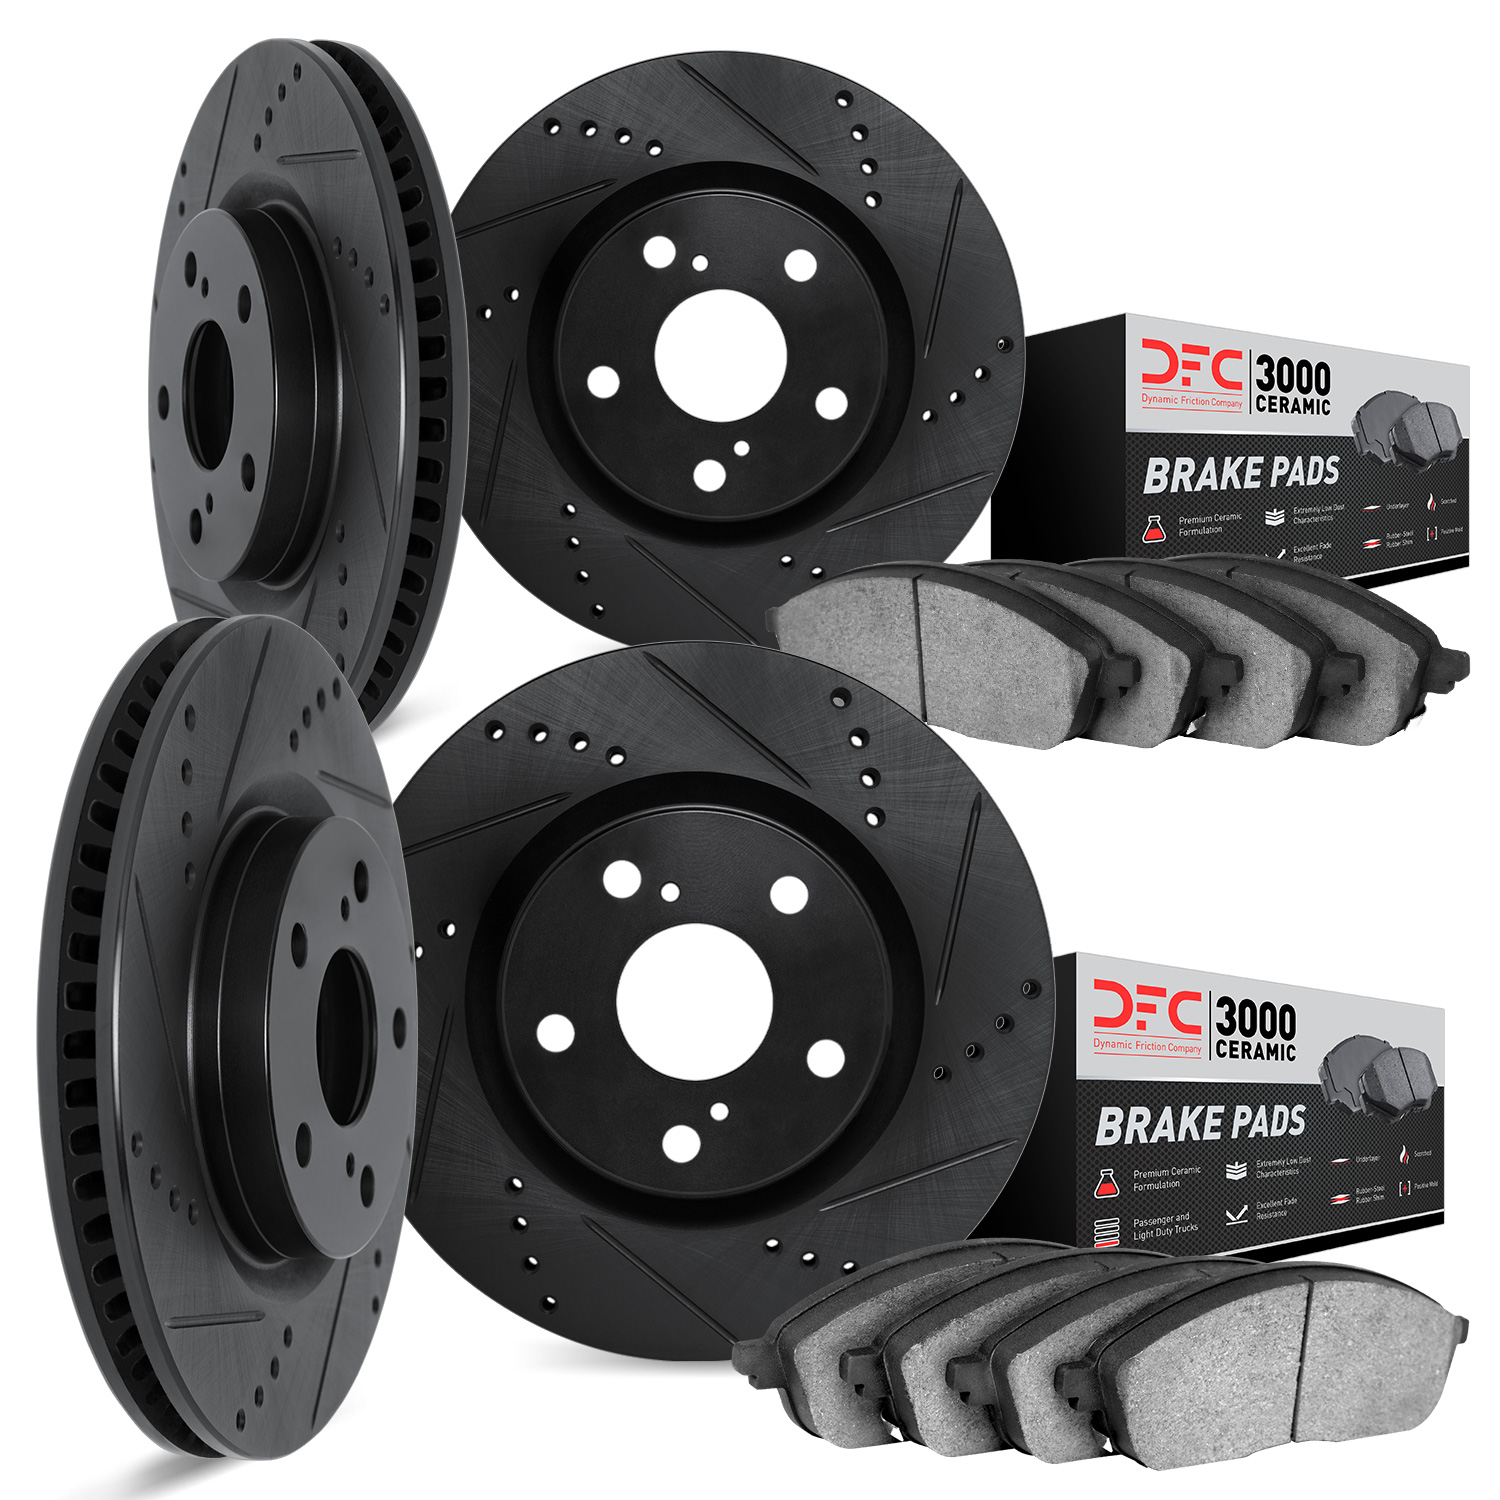 8304-01007 Drilled/Slotted Brake Rotors with 3000-Series Ceramic Brake Pads Kit [Black], 2009-2017 Suzuki, Position: Front and R